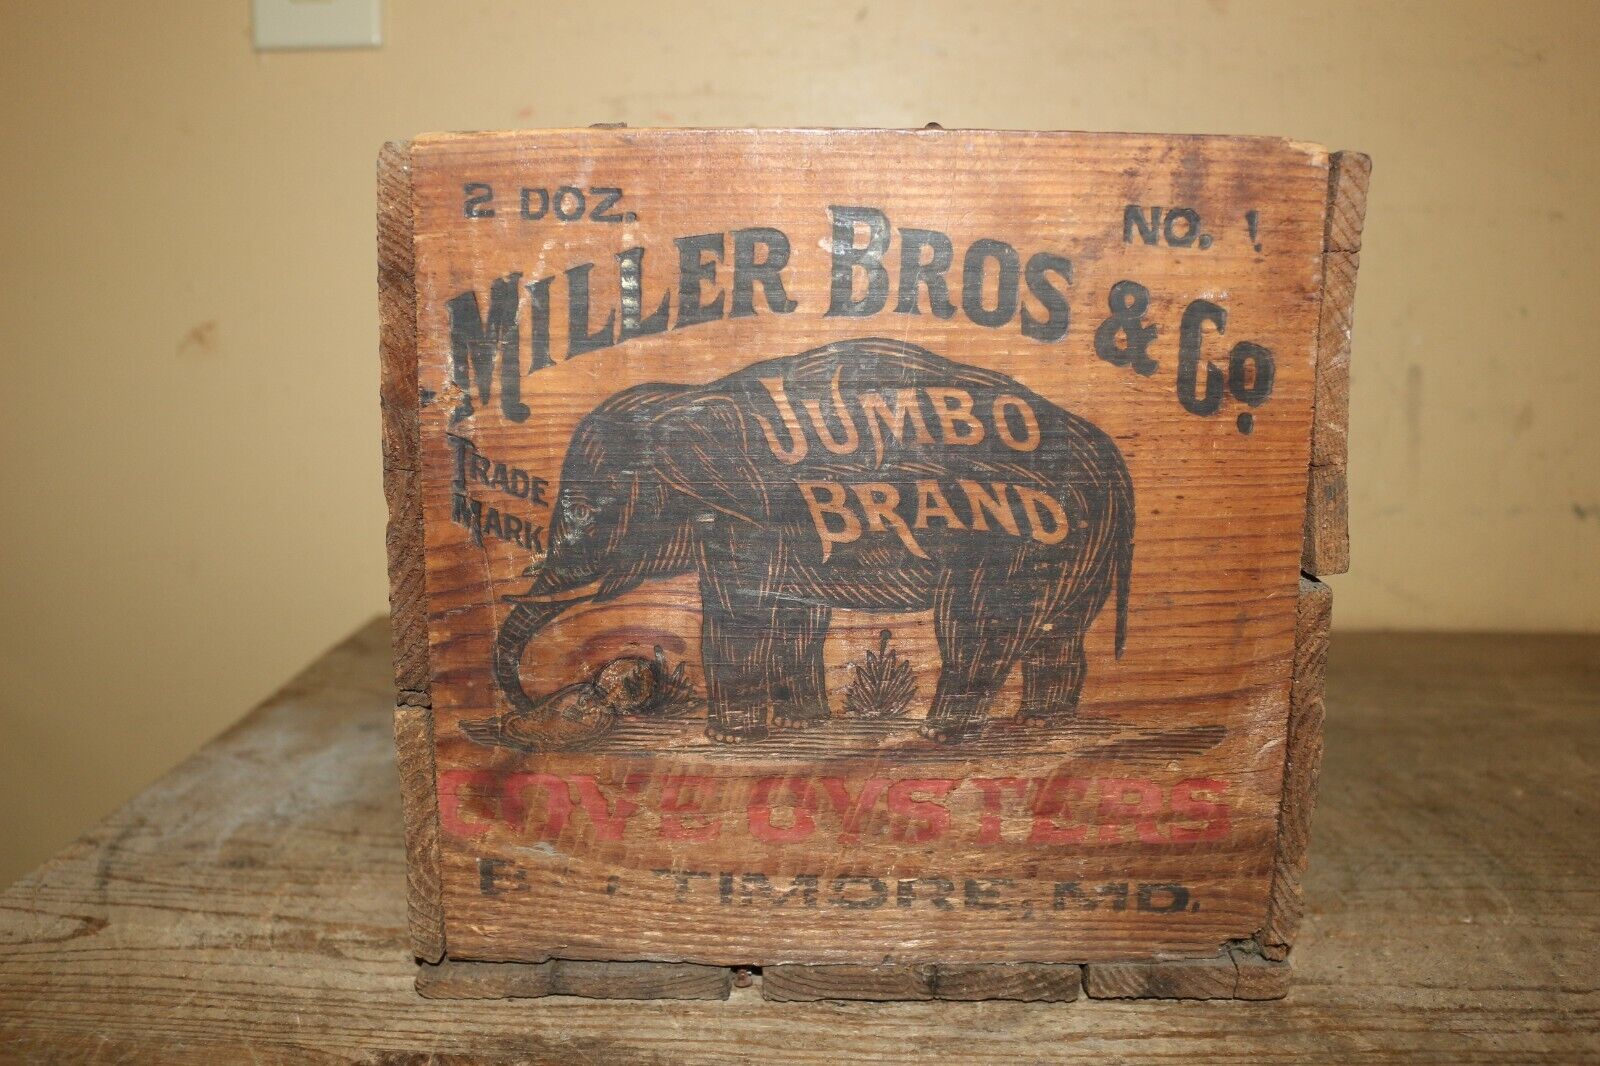 Antique Vintage Miller Bros. & Co. Jumbo Brand Cove Oysters Wood Crate Box Sign